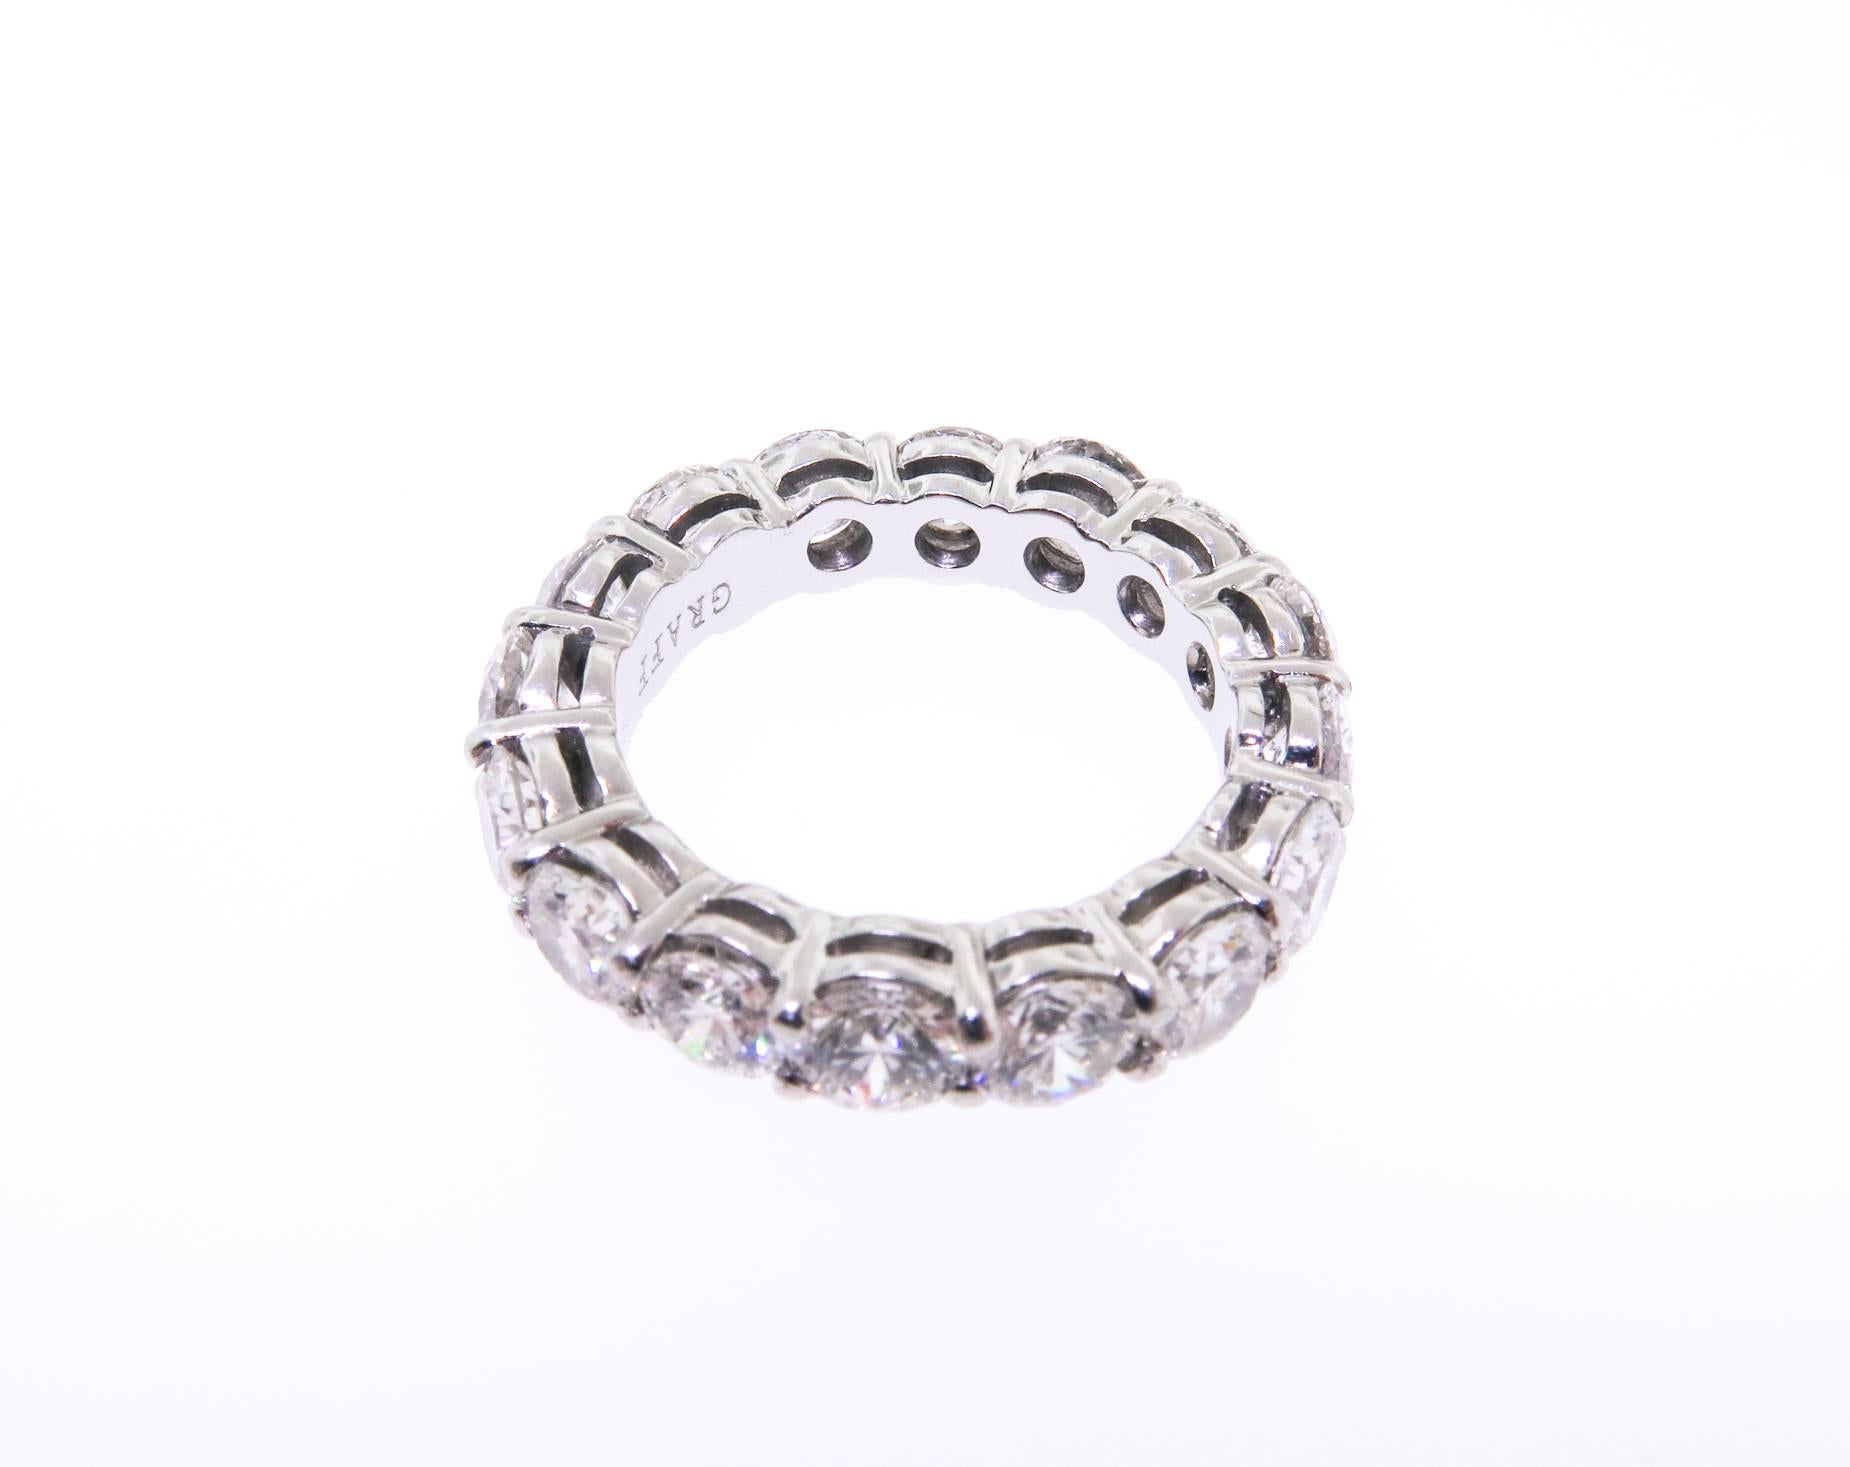 A perfect line of round brilliant cut Diamond eternity band, showcasing fine colorless diamonds shared prong-set in Platinum. Sixteen diamonds weighing 5.15 total carats (H-color/VS1-clarity). 4.5 mm width band. Size 5.5. GIA certified.